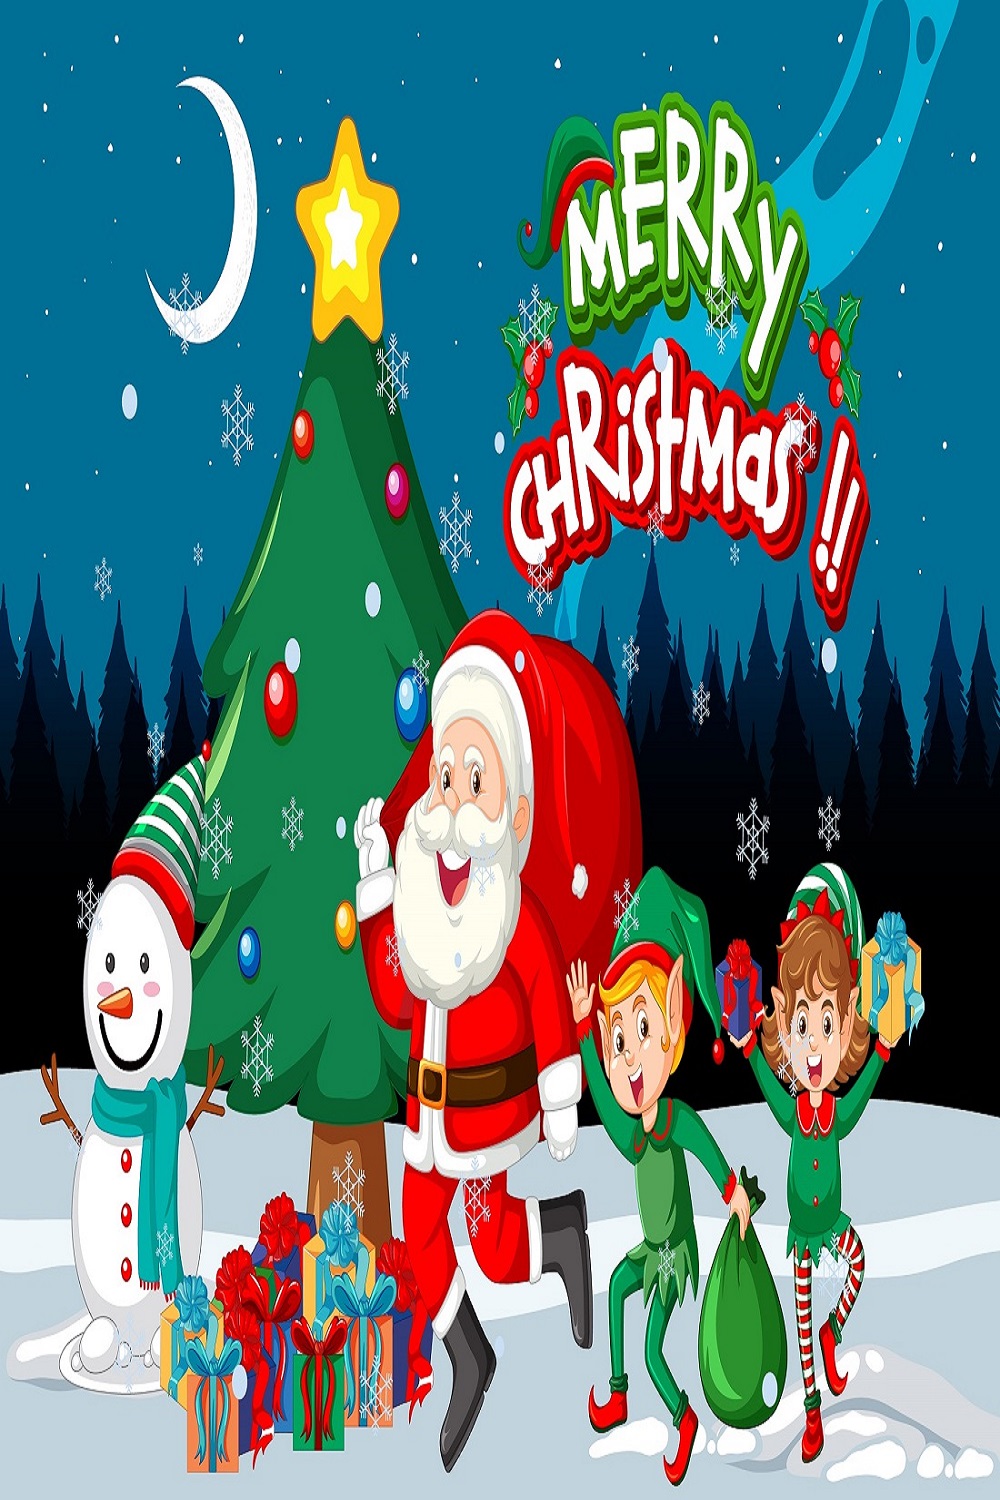 Merry Christmas night poster design pinterest preview image.